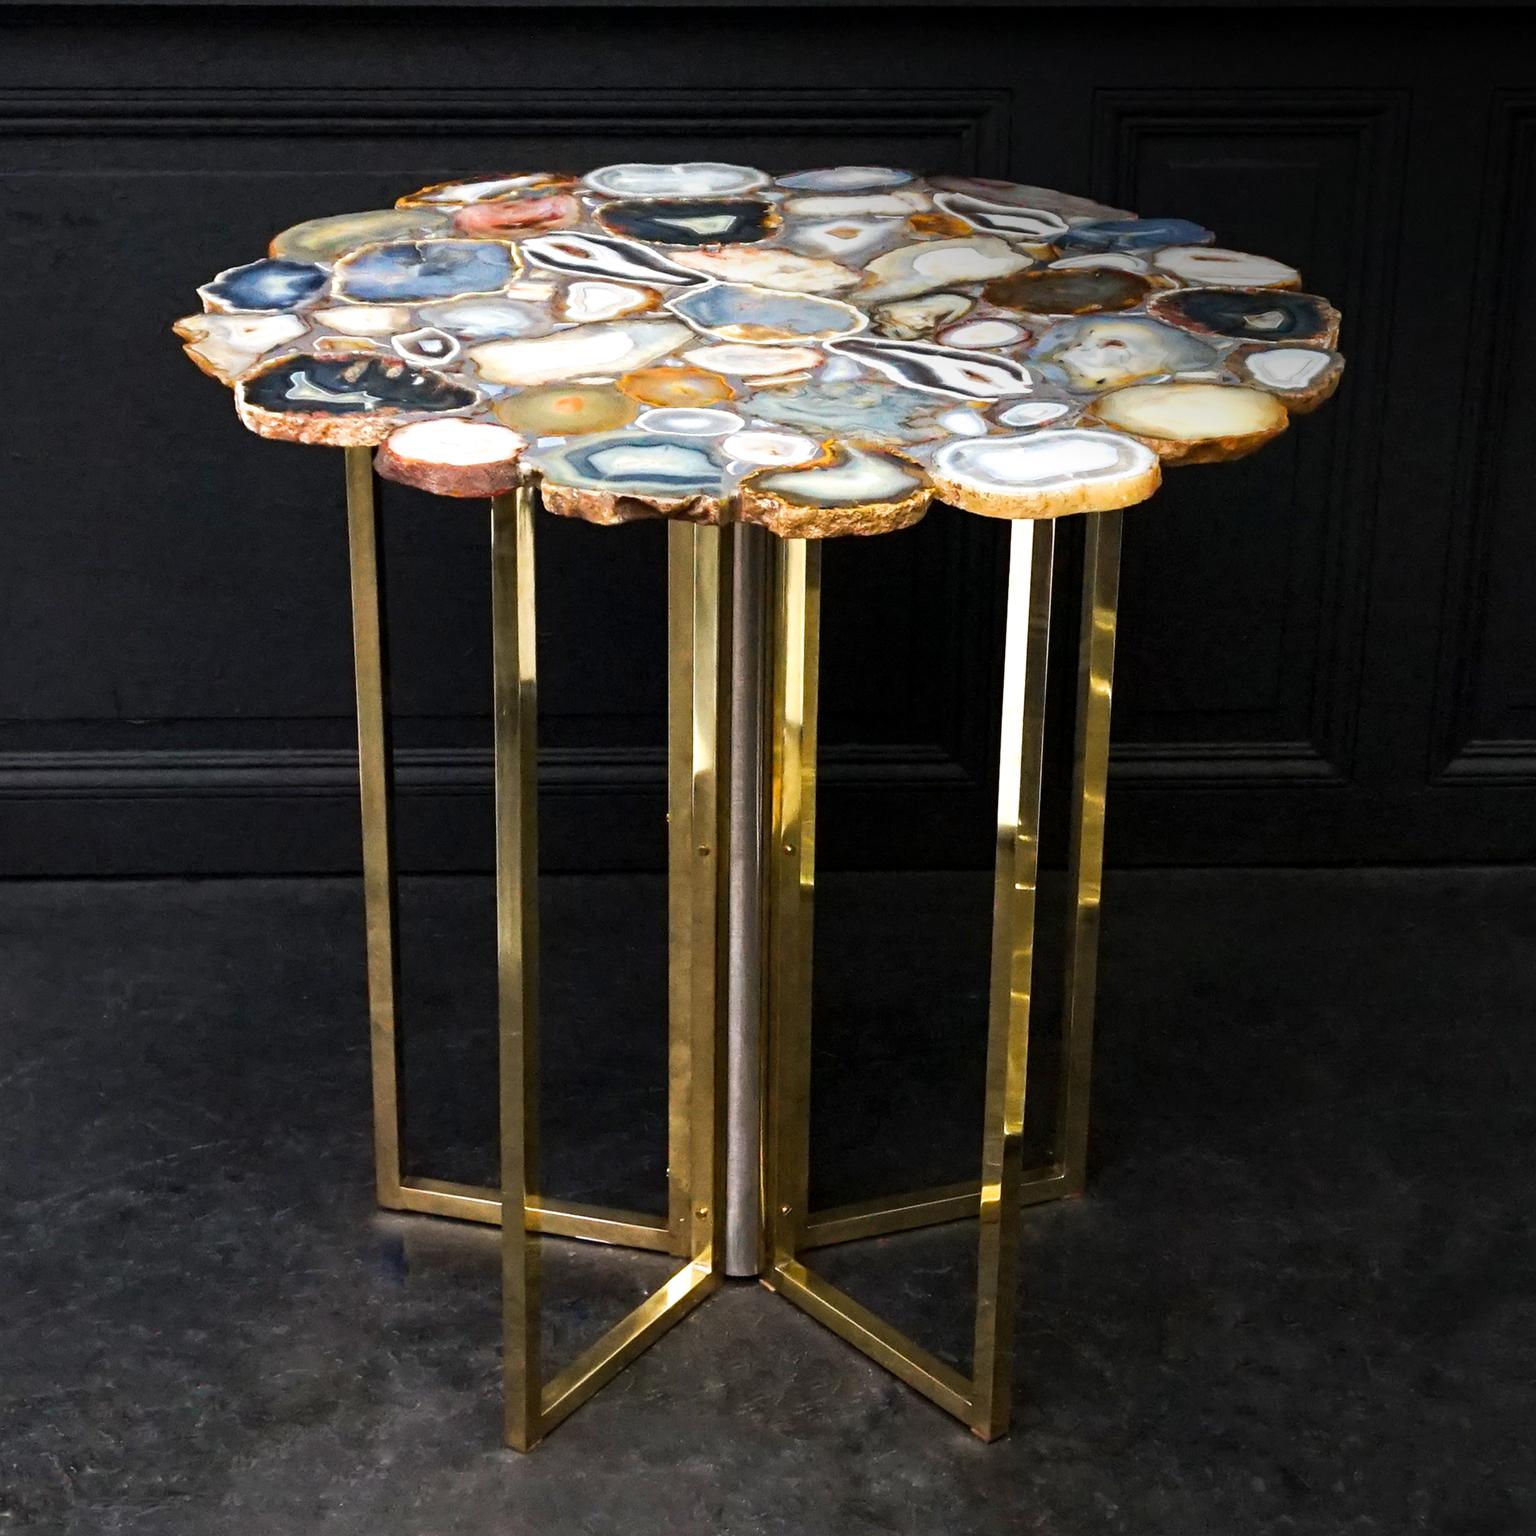 Perfect luxurious and colorful, 1960s smooth agate tabletop.
Very pretty gemstone sliced top with shiny brass and chrome legs.

This would be the perfect eyecatcher in any interior.